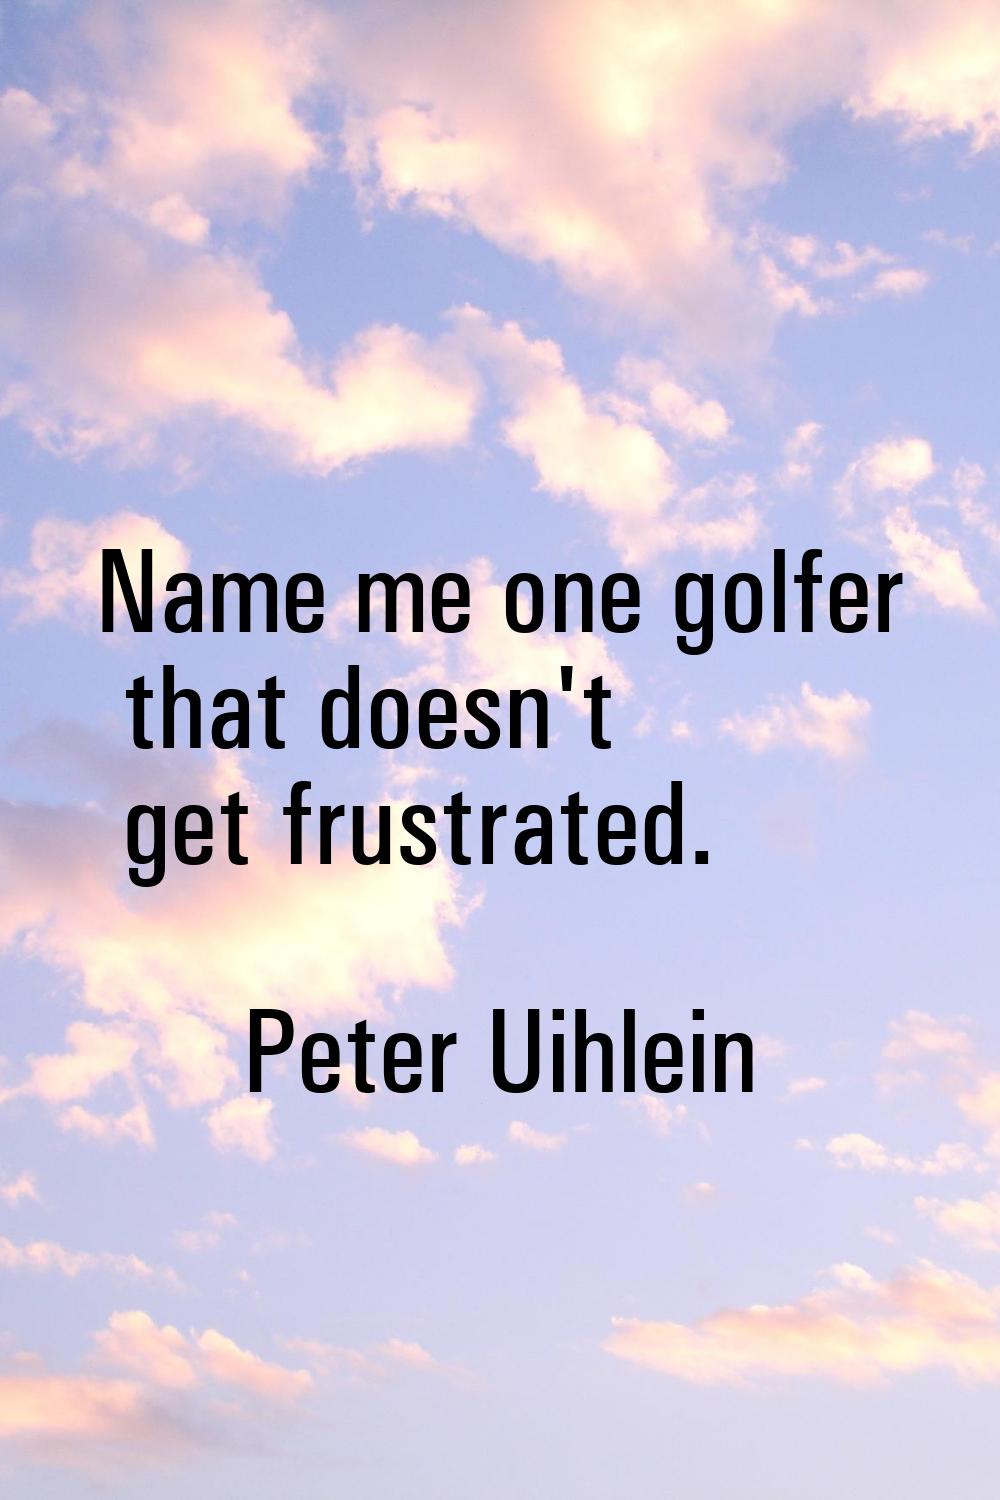 Name me one golfer that doesn't get frustrated.